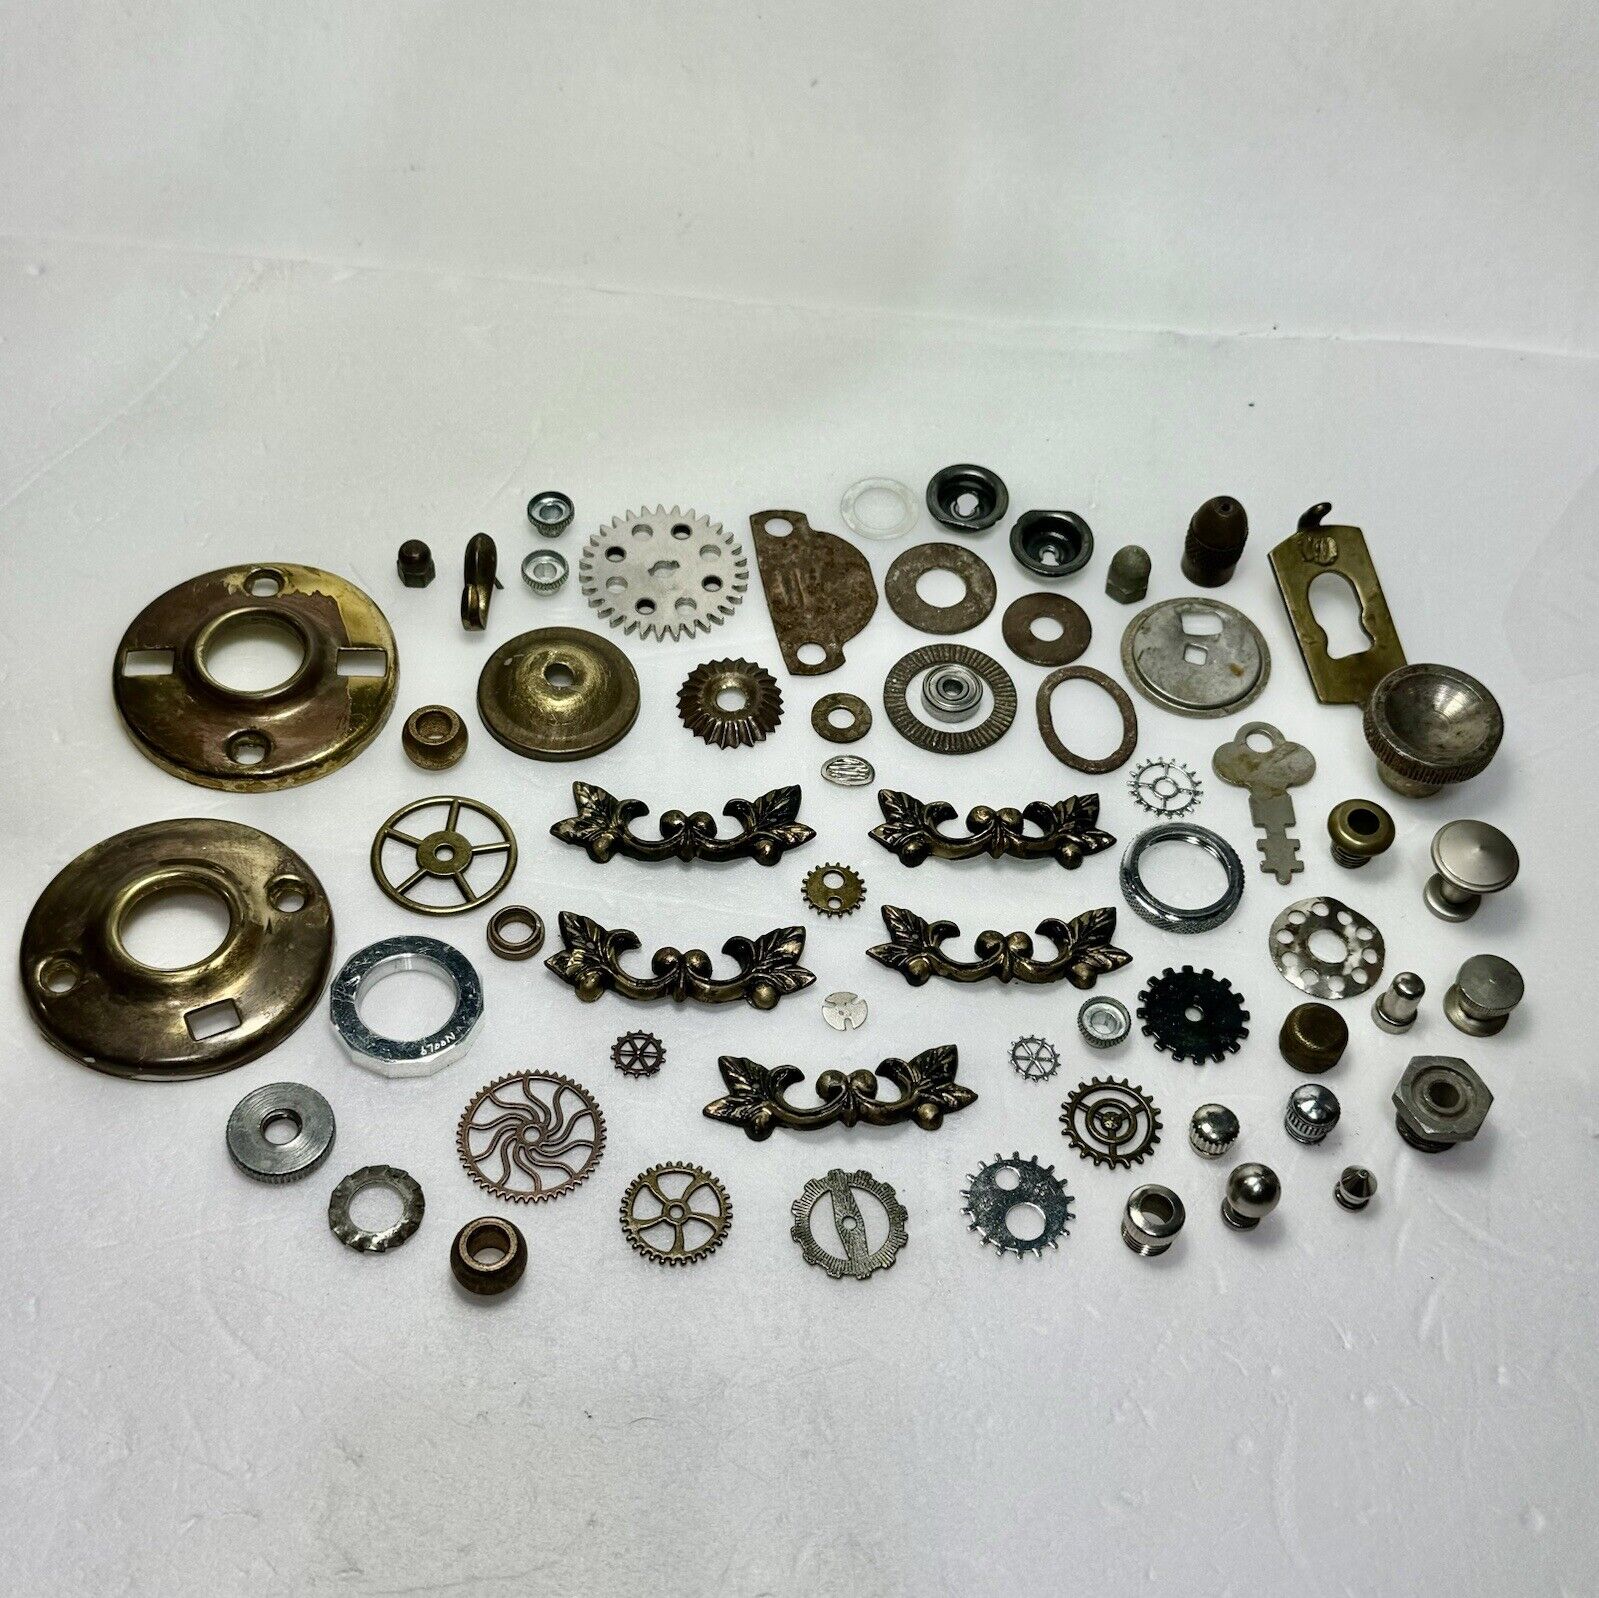 Lot of 80 Small Mixed Metal Parts & Pieces Steampunk Art Projects Crafts